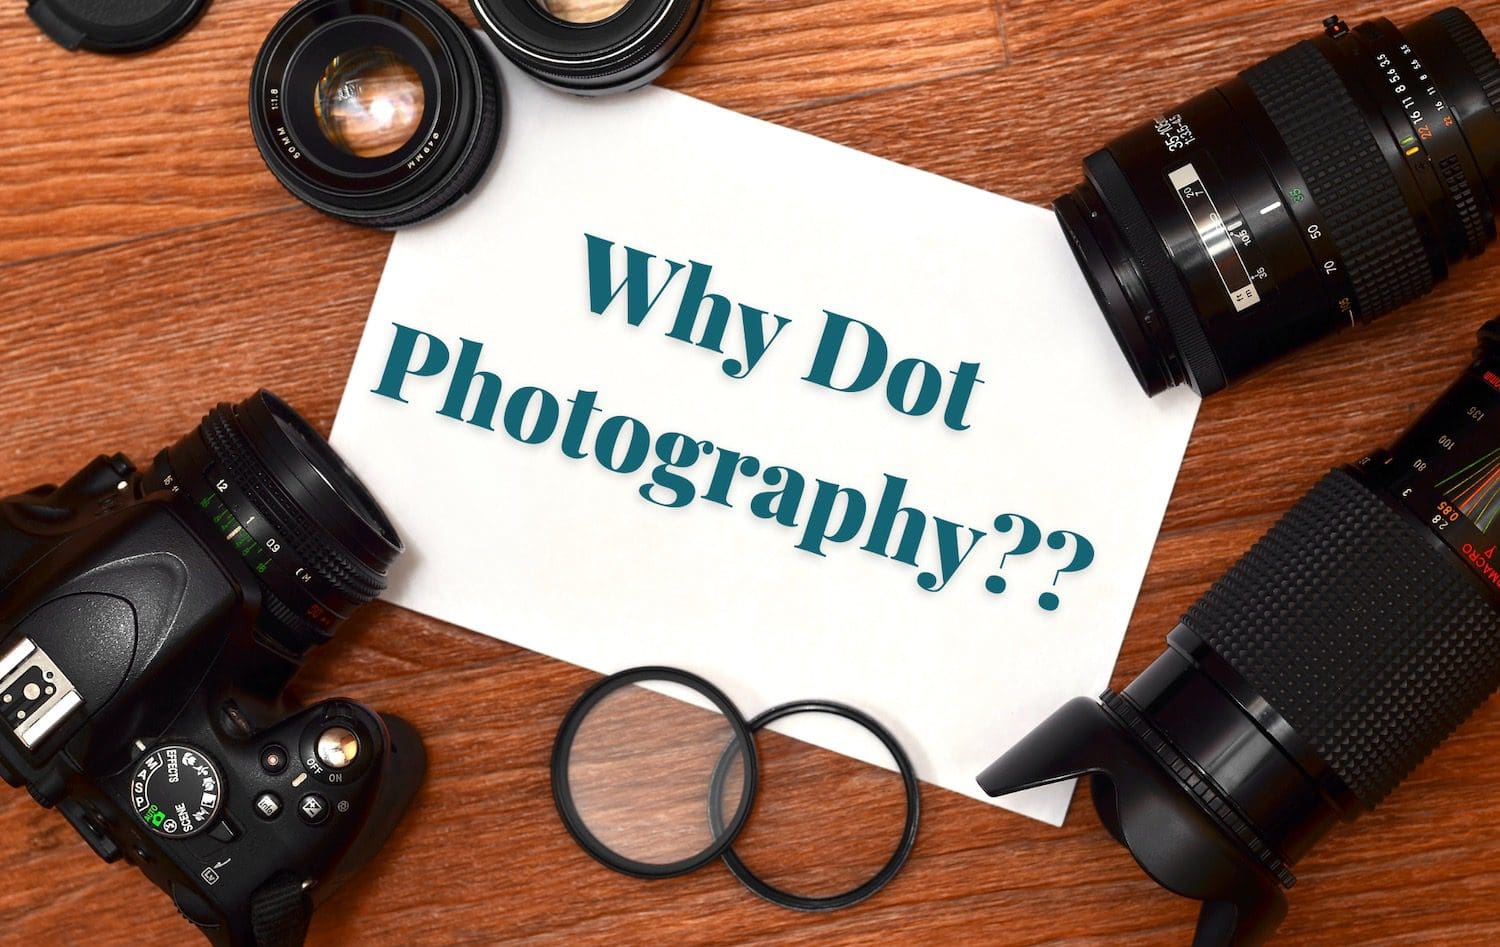 why dot photography?? image